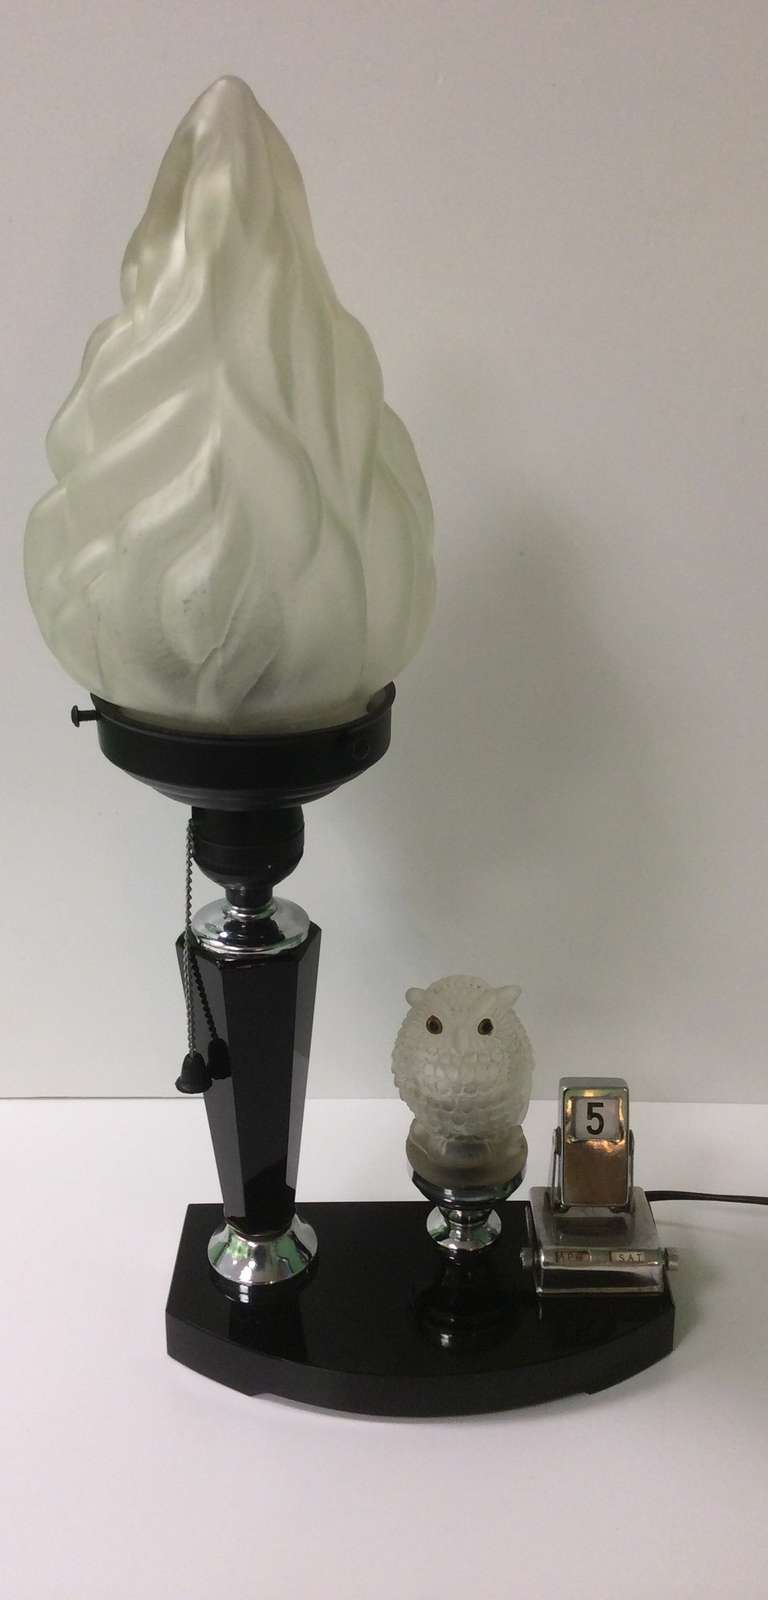 A really superb Art Deco Table Lamp with illuminating Owl and Calender, the lamp is on a black glass base with faceted black glass column, original glass torcher shade, the Owl figure is also glass, pull switch for on off and owl lite.